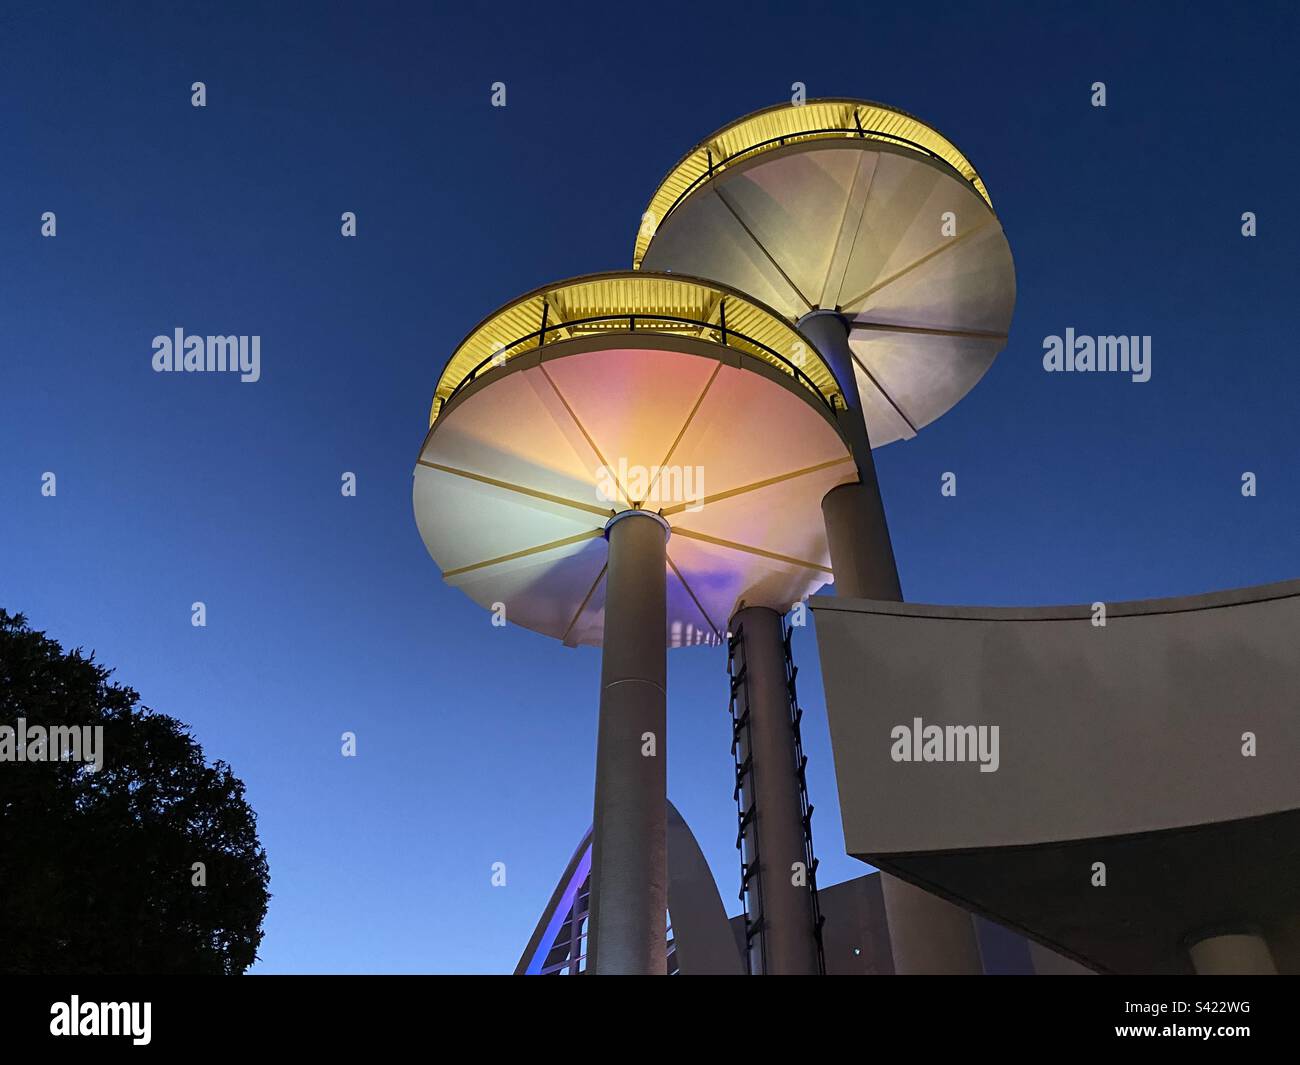 Street lamps that look like space ships Stock Photo